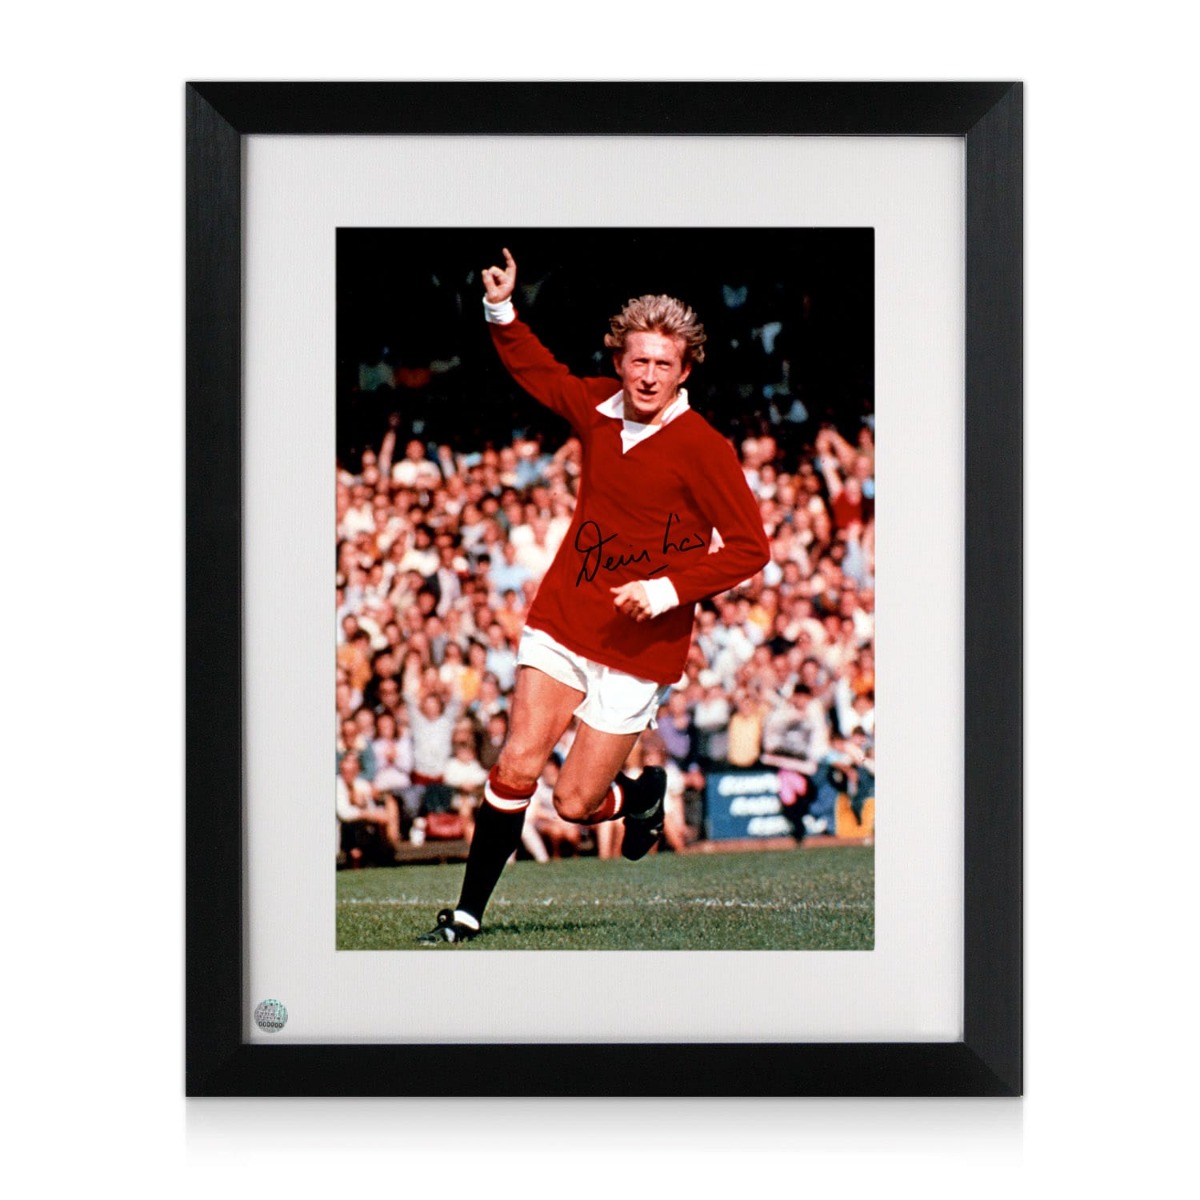 DENIS LAW SIGNED MANCHESTER UNITED 10x8 GEORGE BEST FOOTBALL PHOTO COA PROOF 